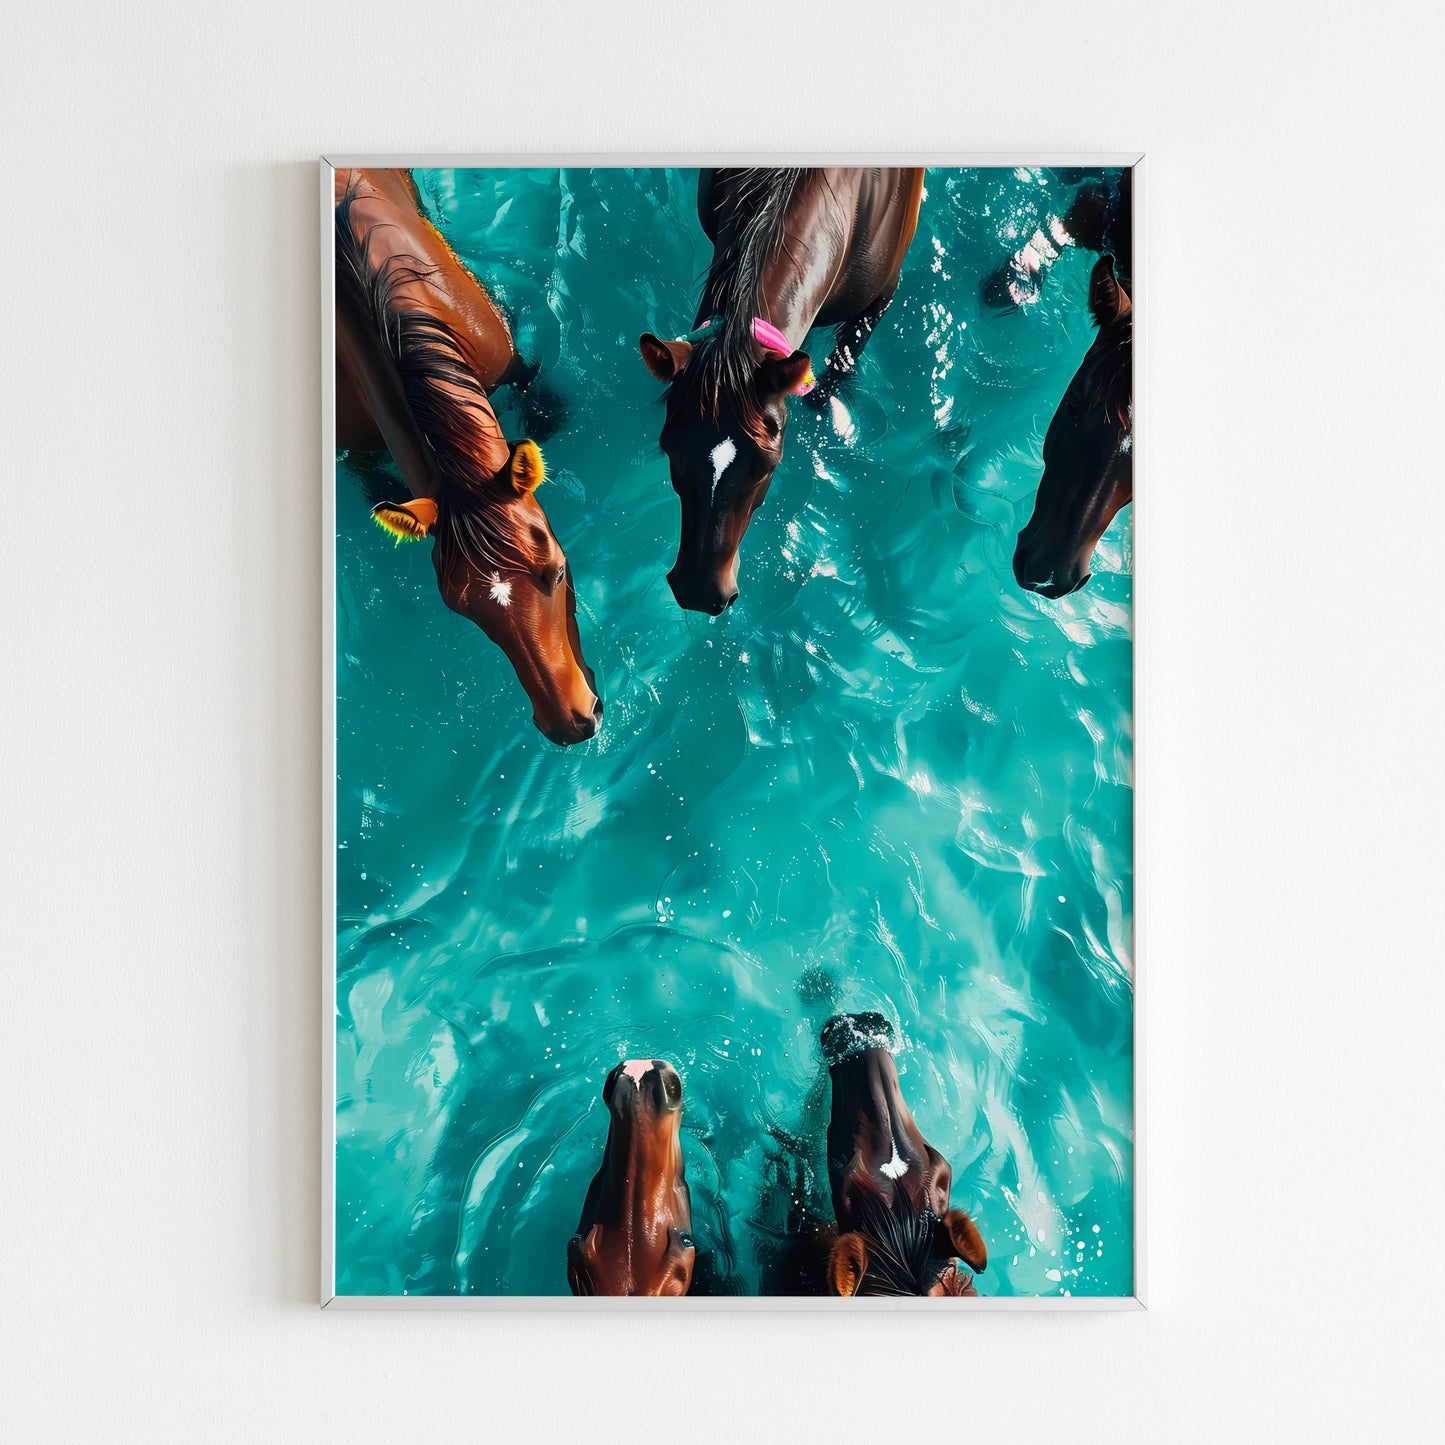 Witness the beginning of a horse's majestic swim in the sea with this printable poster (physical or digital).